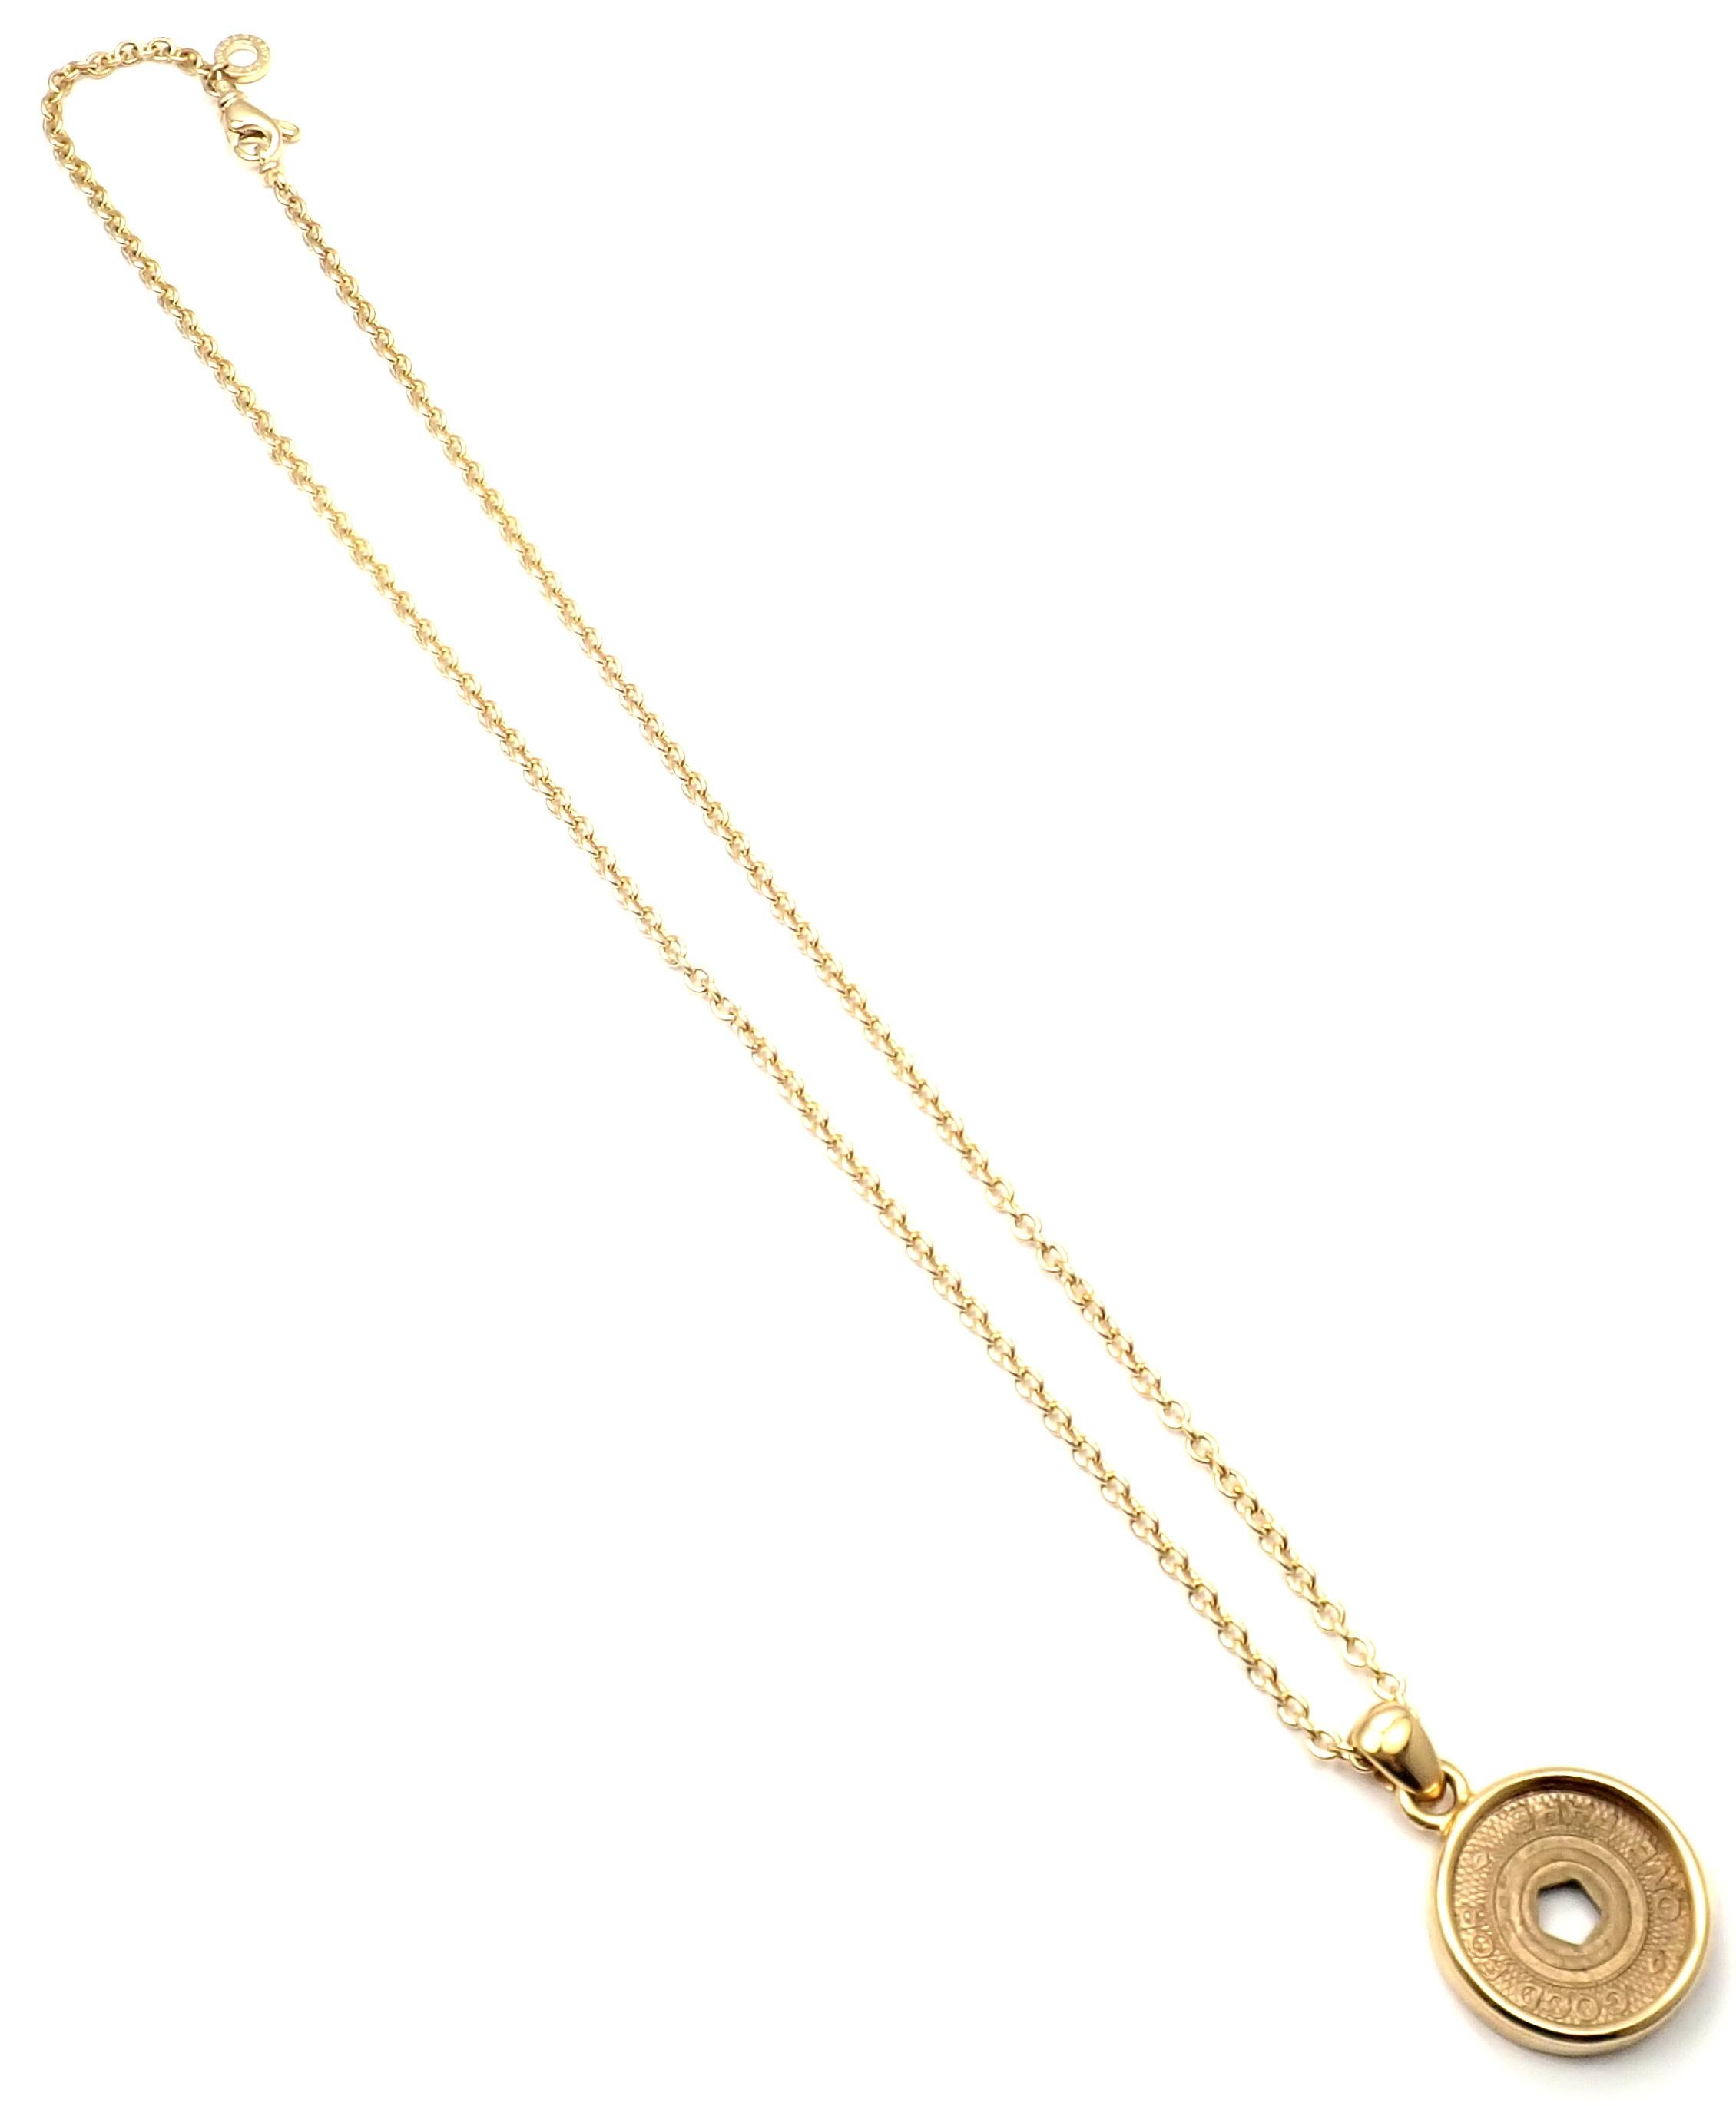 Bulgari NYC Subway Token Limited Edition Yellow Gold Pendant Necklace For Sale 2